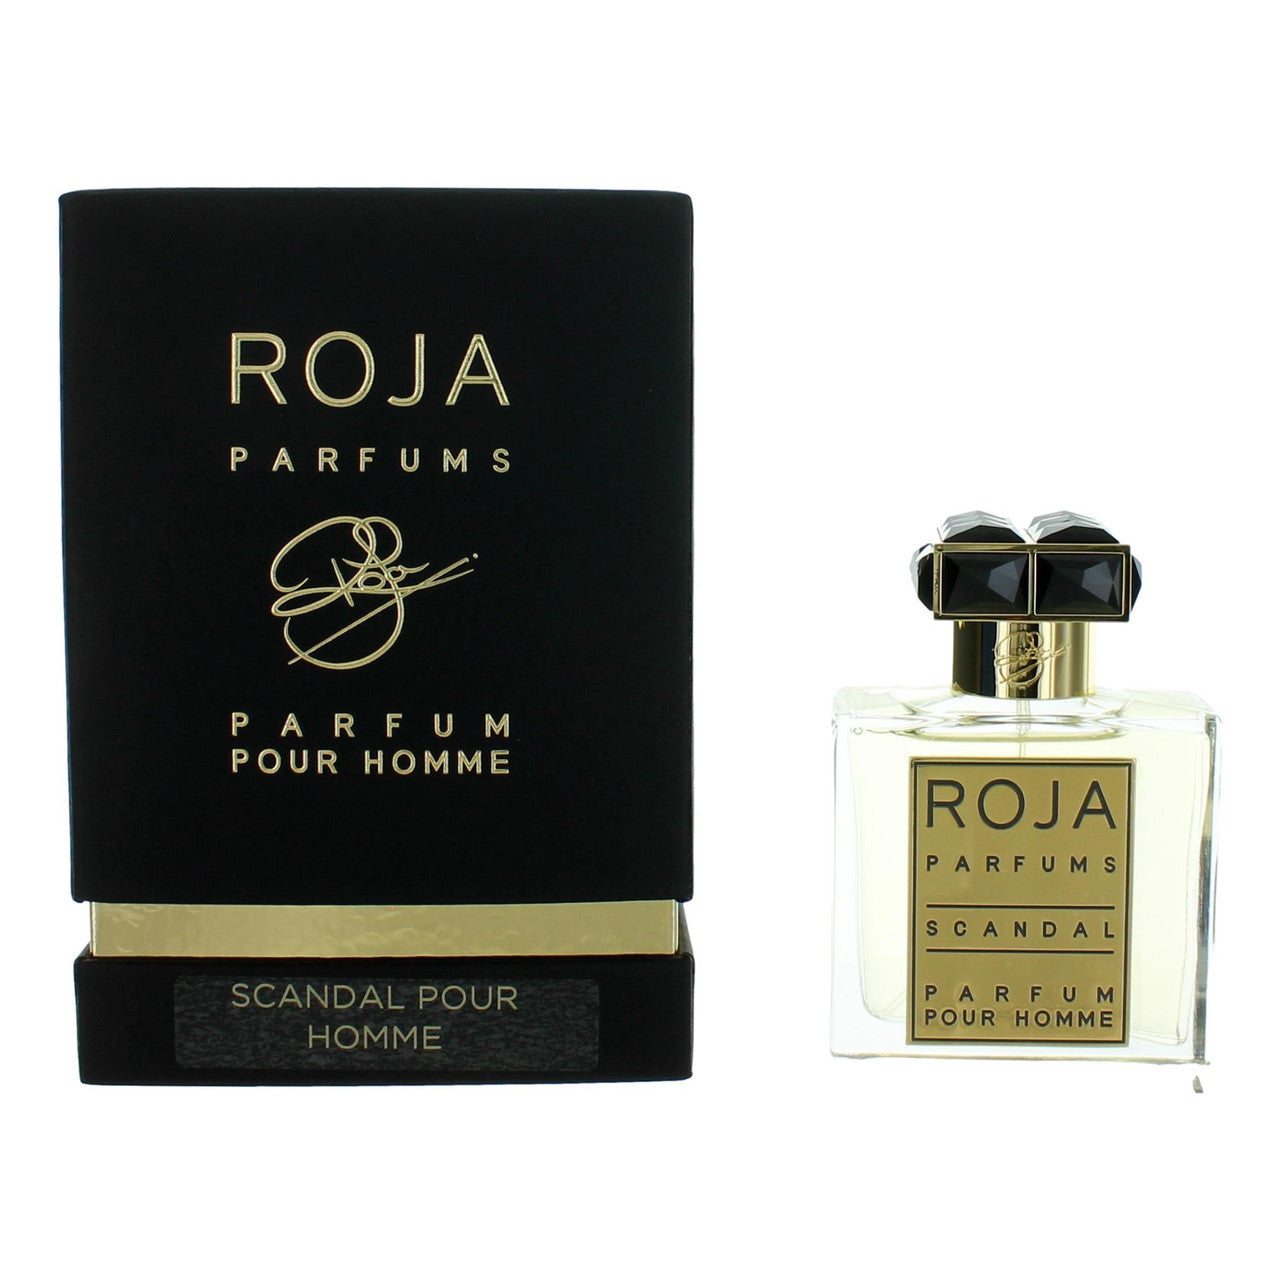 1.7 oz bottle of Scandal Pour Homme by Roja Parfums